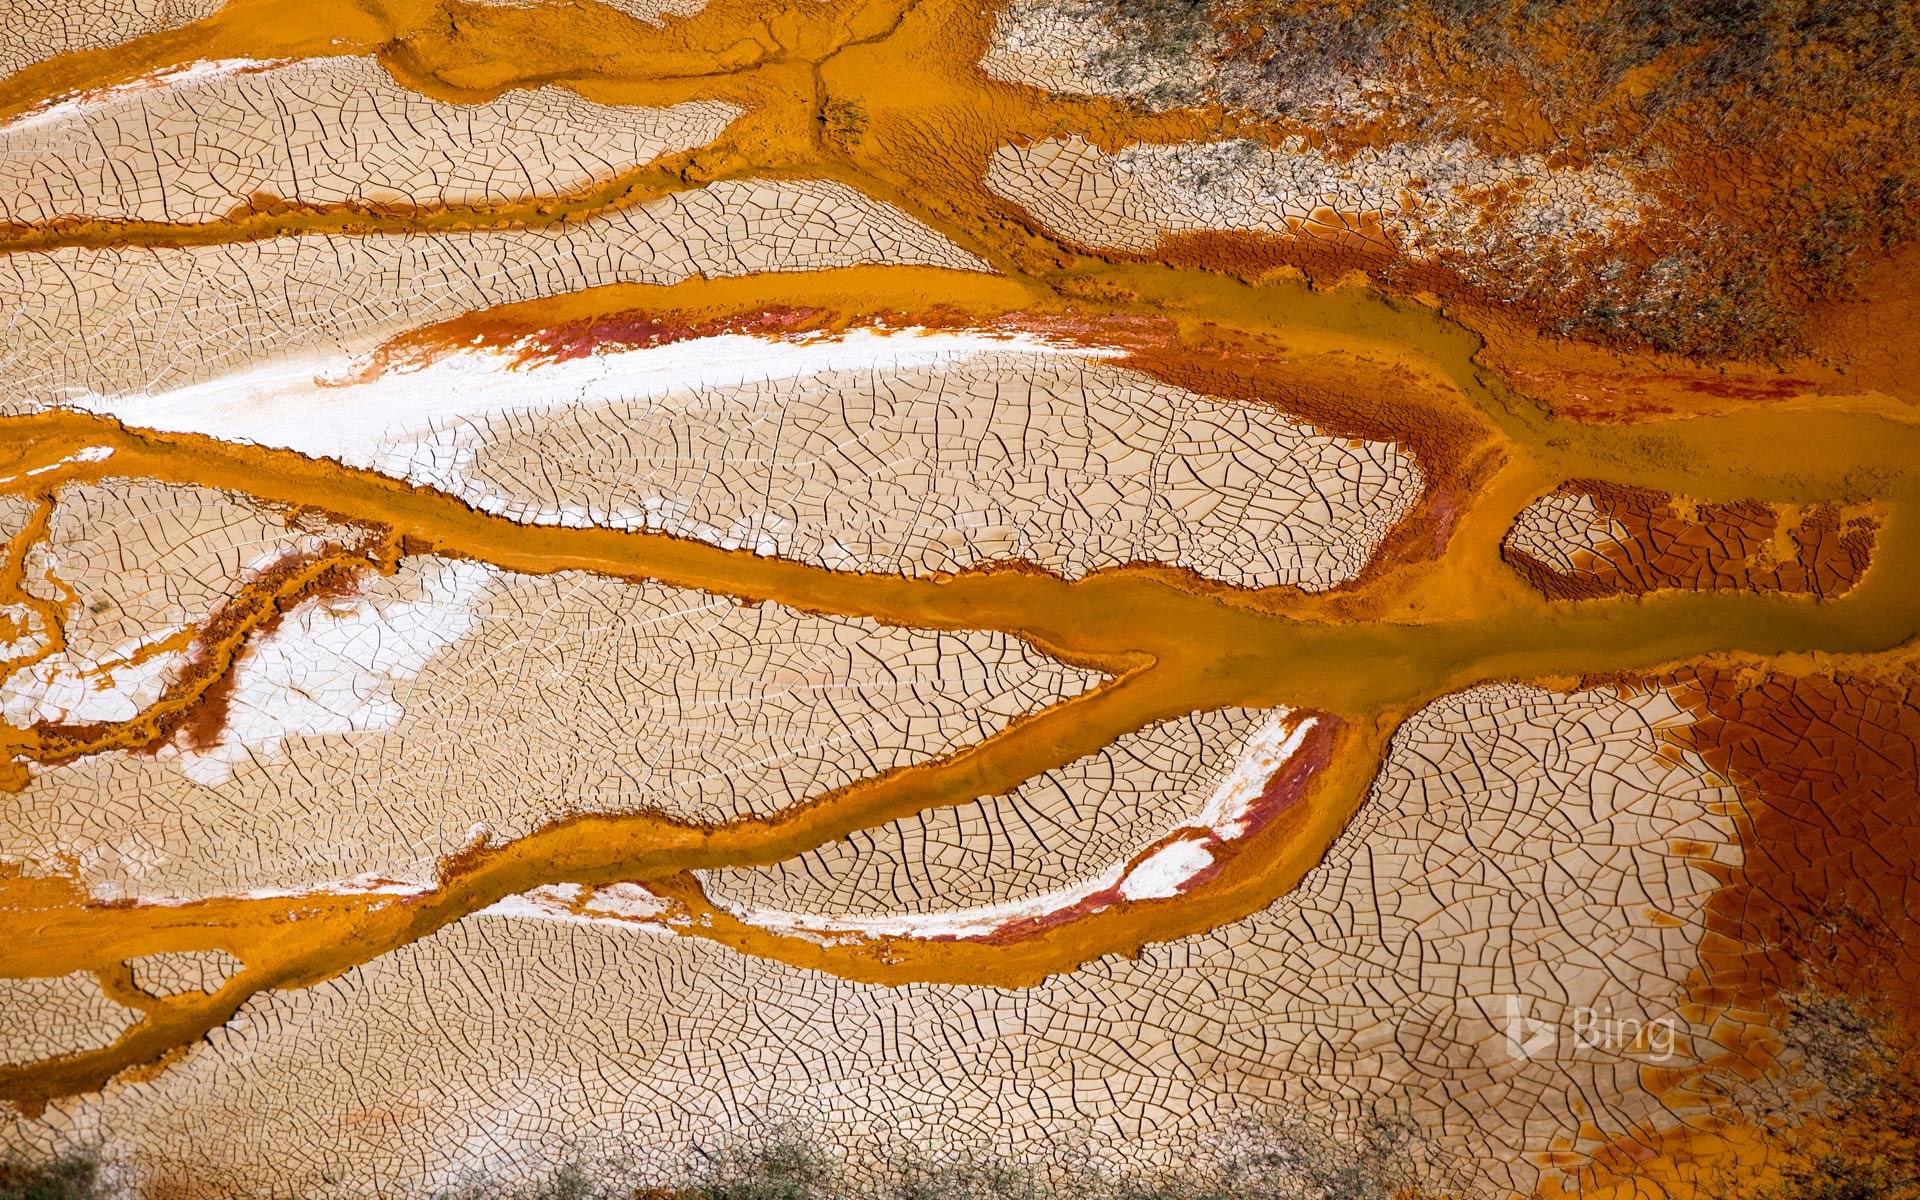 Channels of the Rio Tinto in Spain